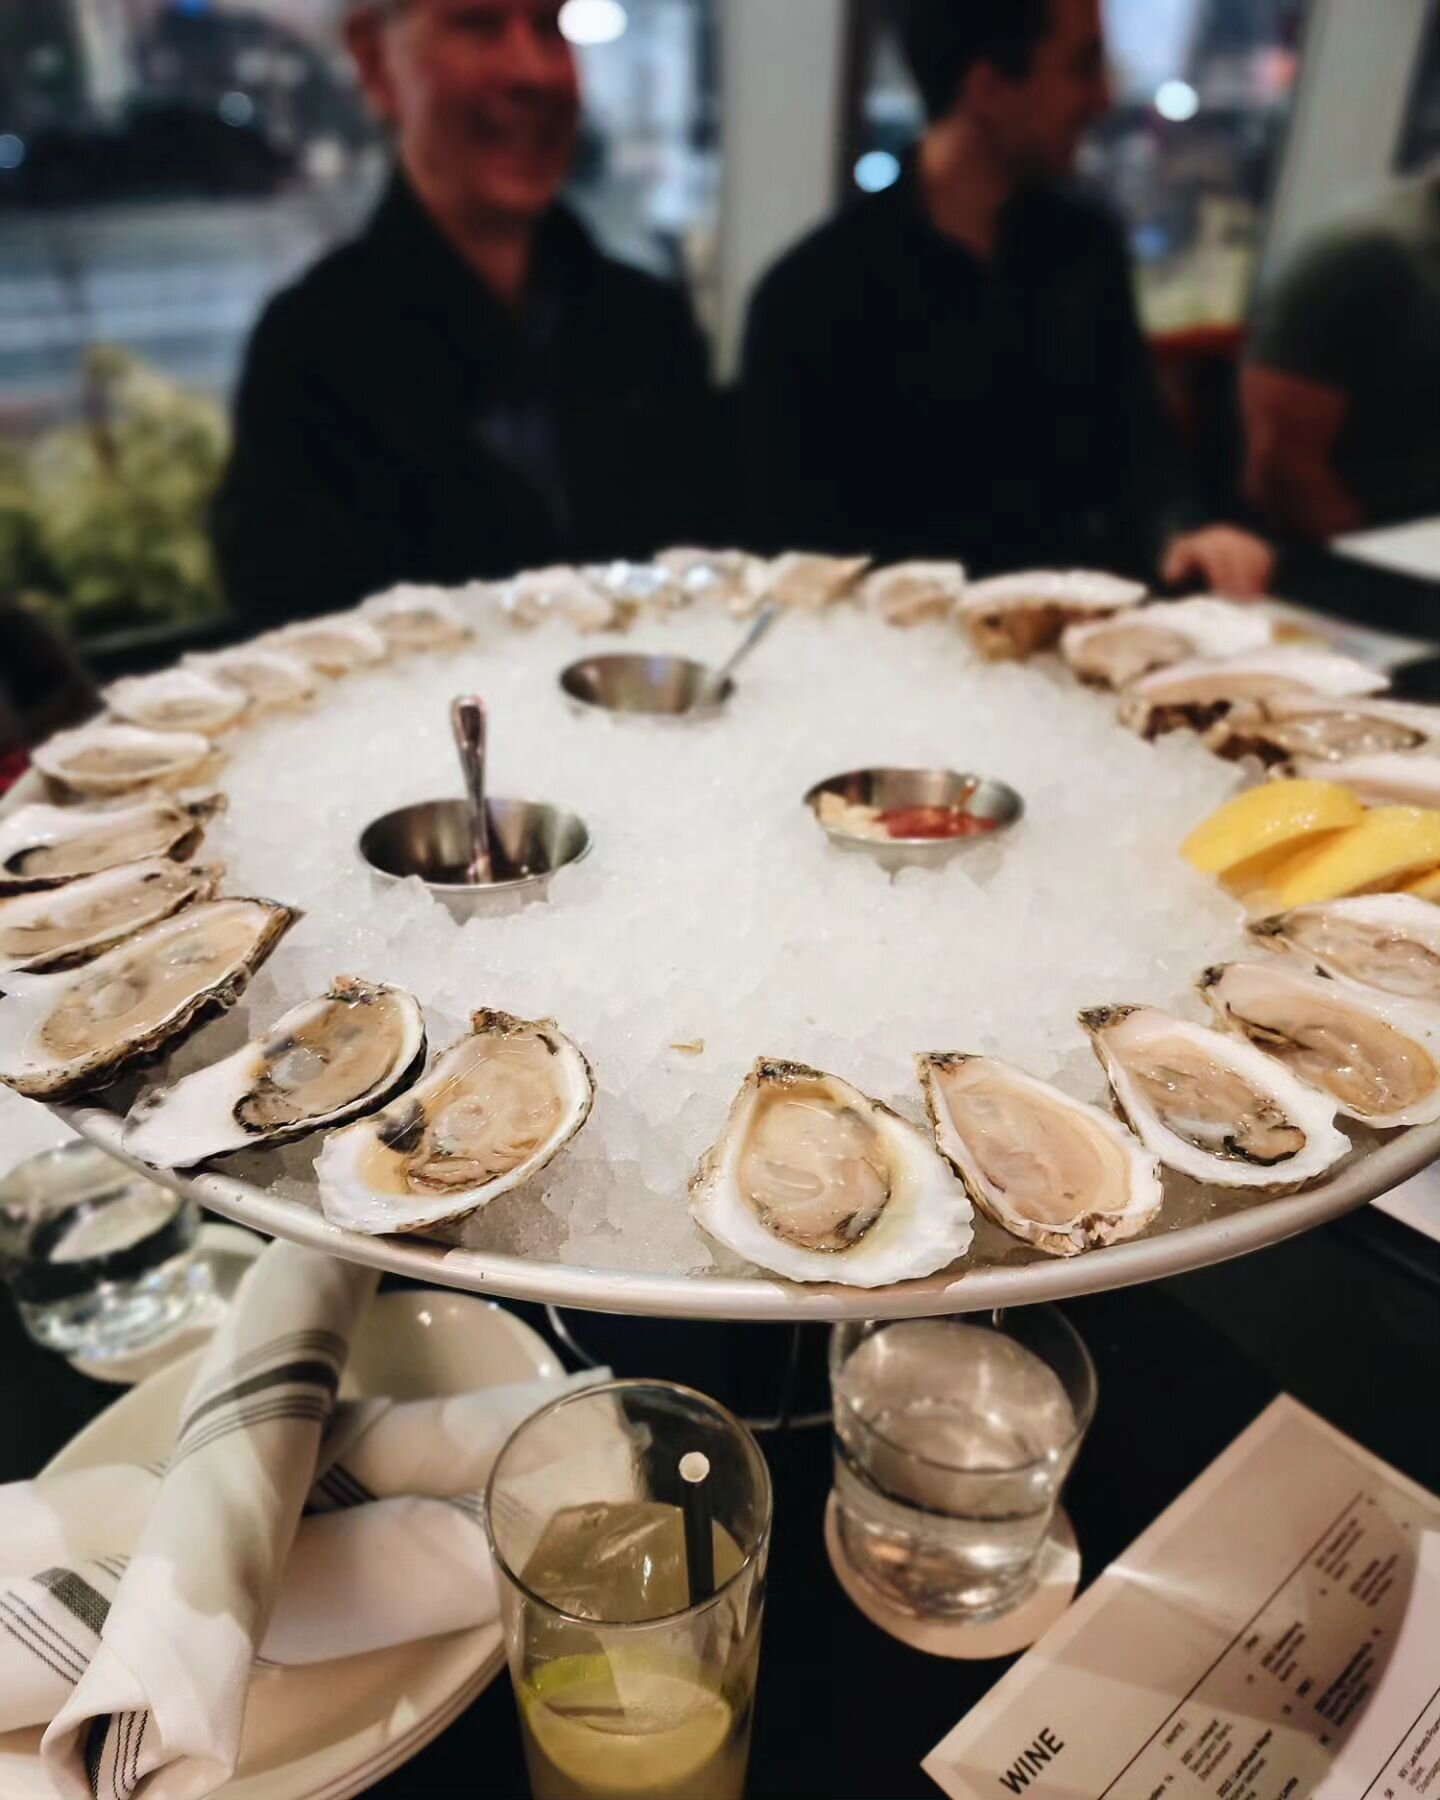 Photo dump from a whirlwind trip to Boston last month! Oyster tasting at @row34 Cambridge with OMG members, three oyster growers and @noaa, women in seafood reception at @wulfsfish with @seafood_and_gender_equality, led oyster + sake class at @the.ko